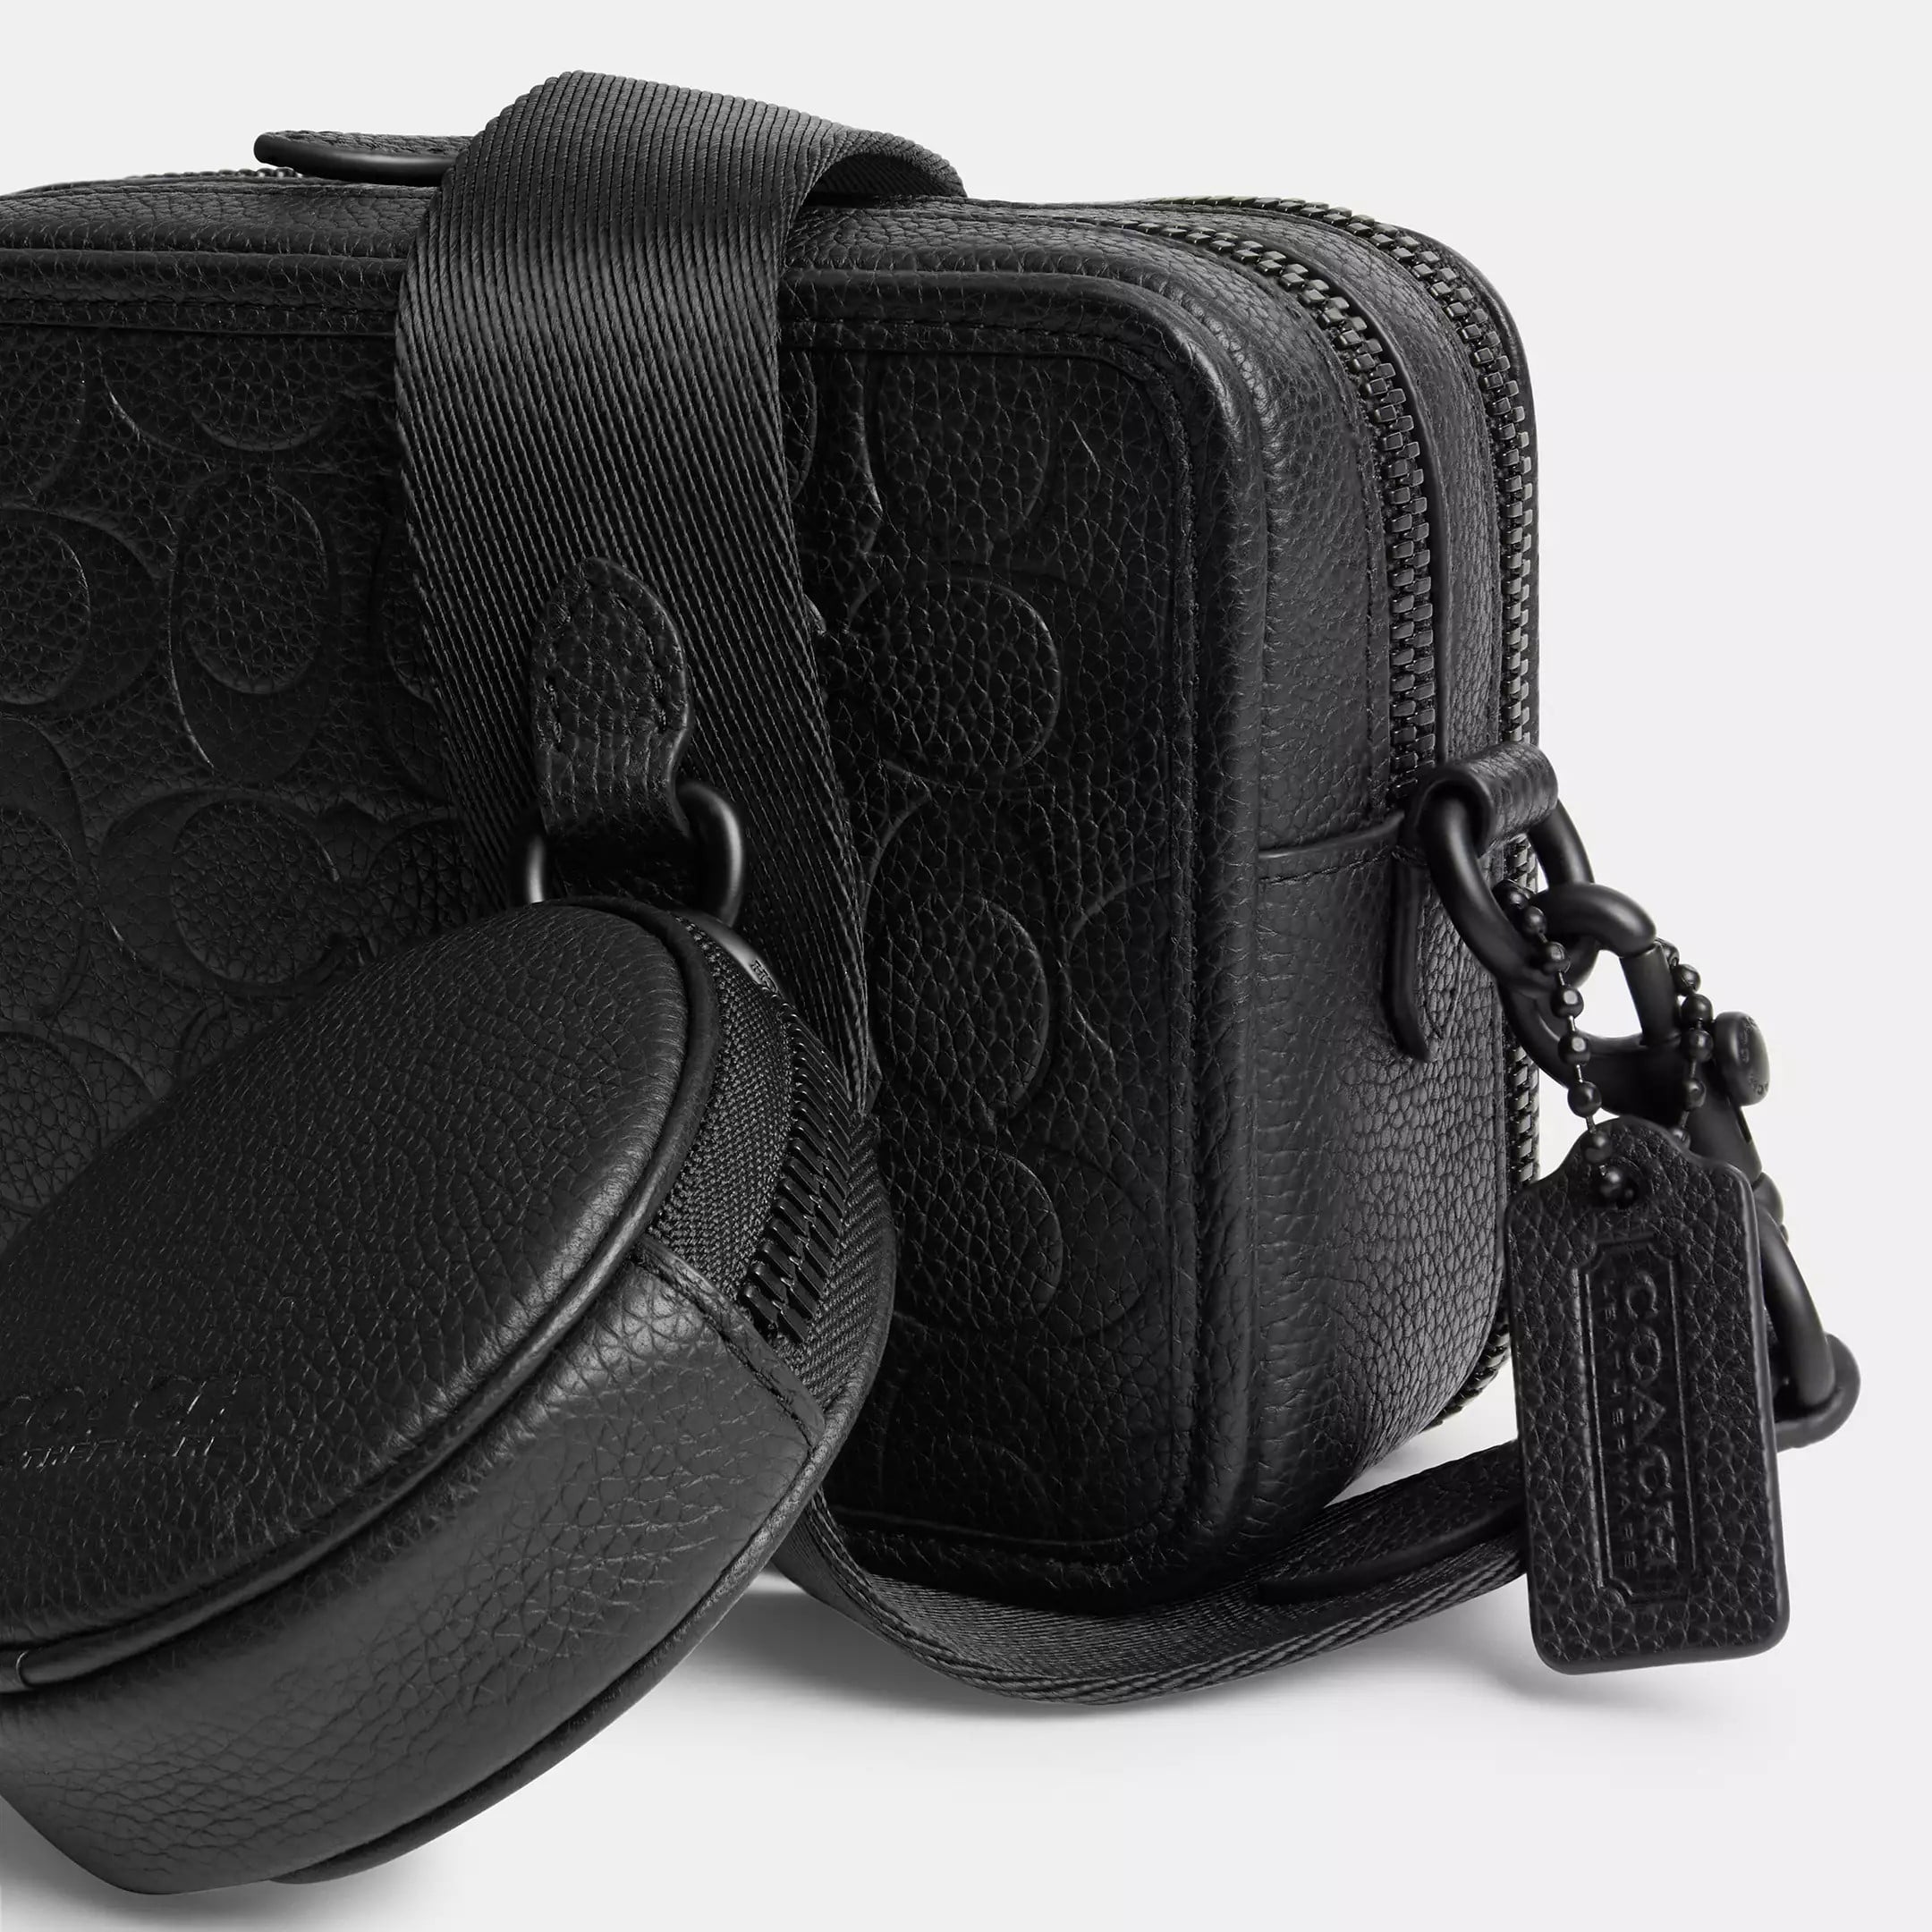 TÚI ĐEO CHÉO COACH NAM CHARTER CROSSBODY WITH HYBRID POUCH IN BLACK SIGNATURE LEATHER CP268 1